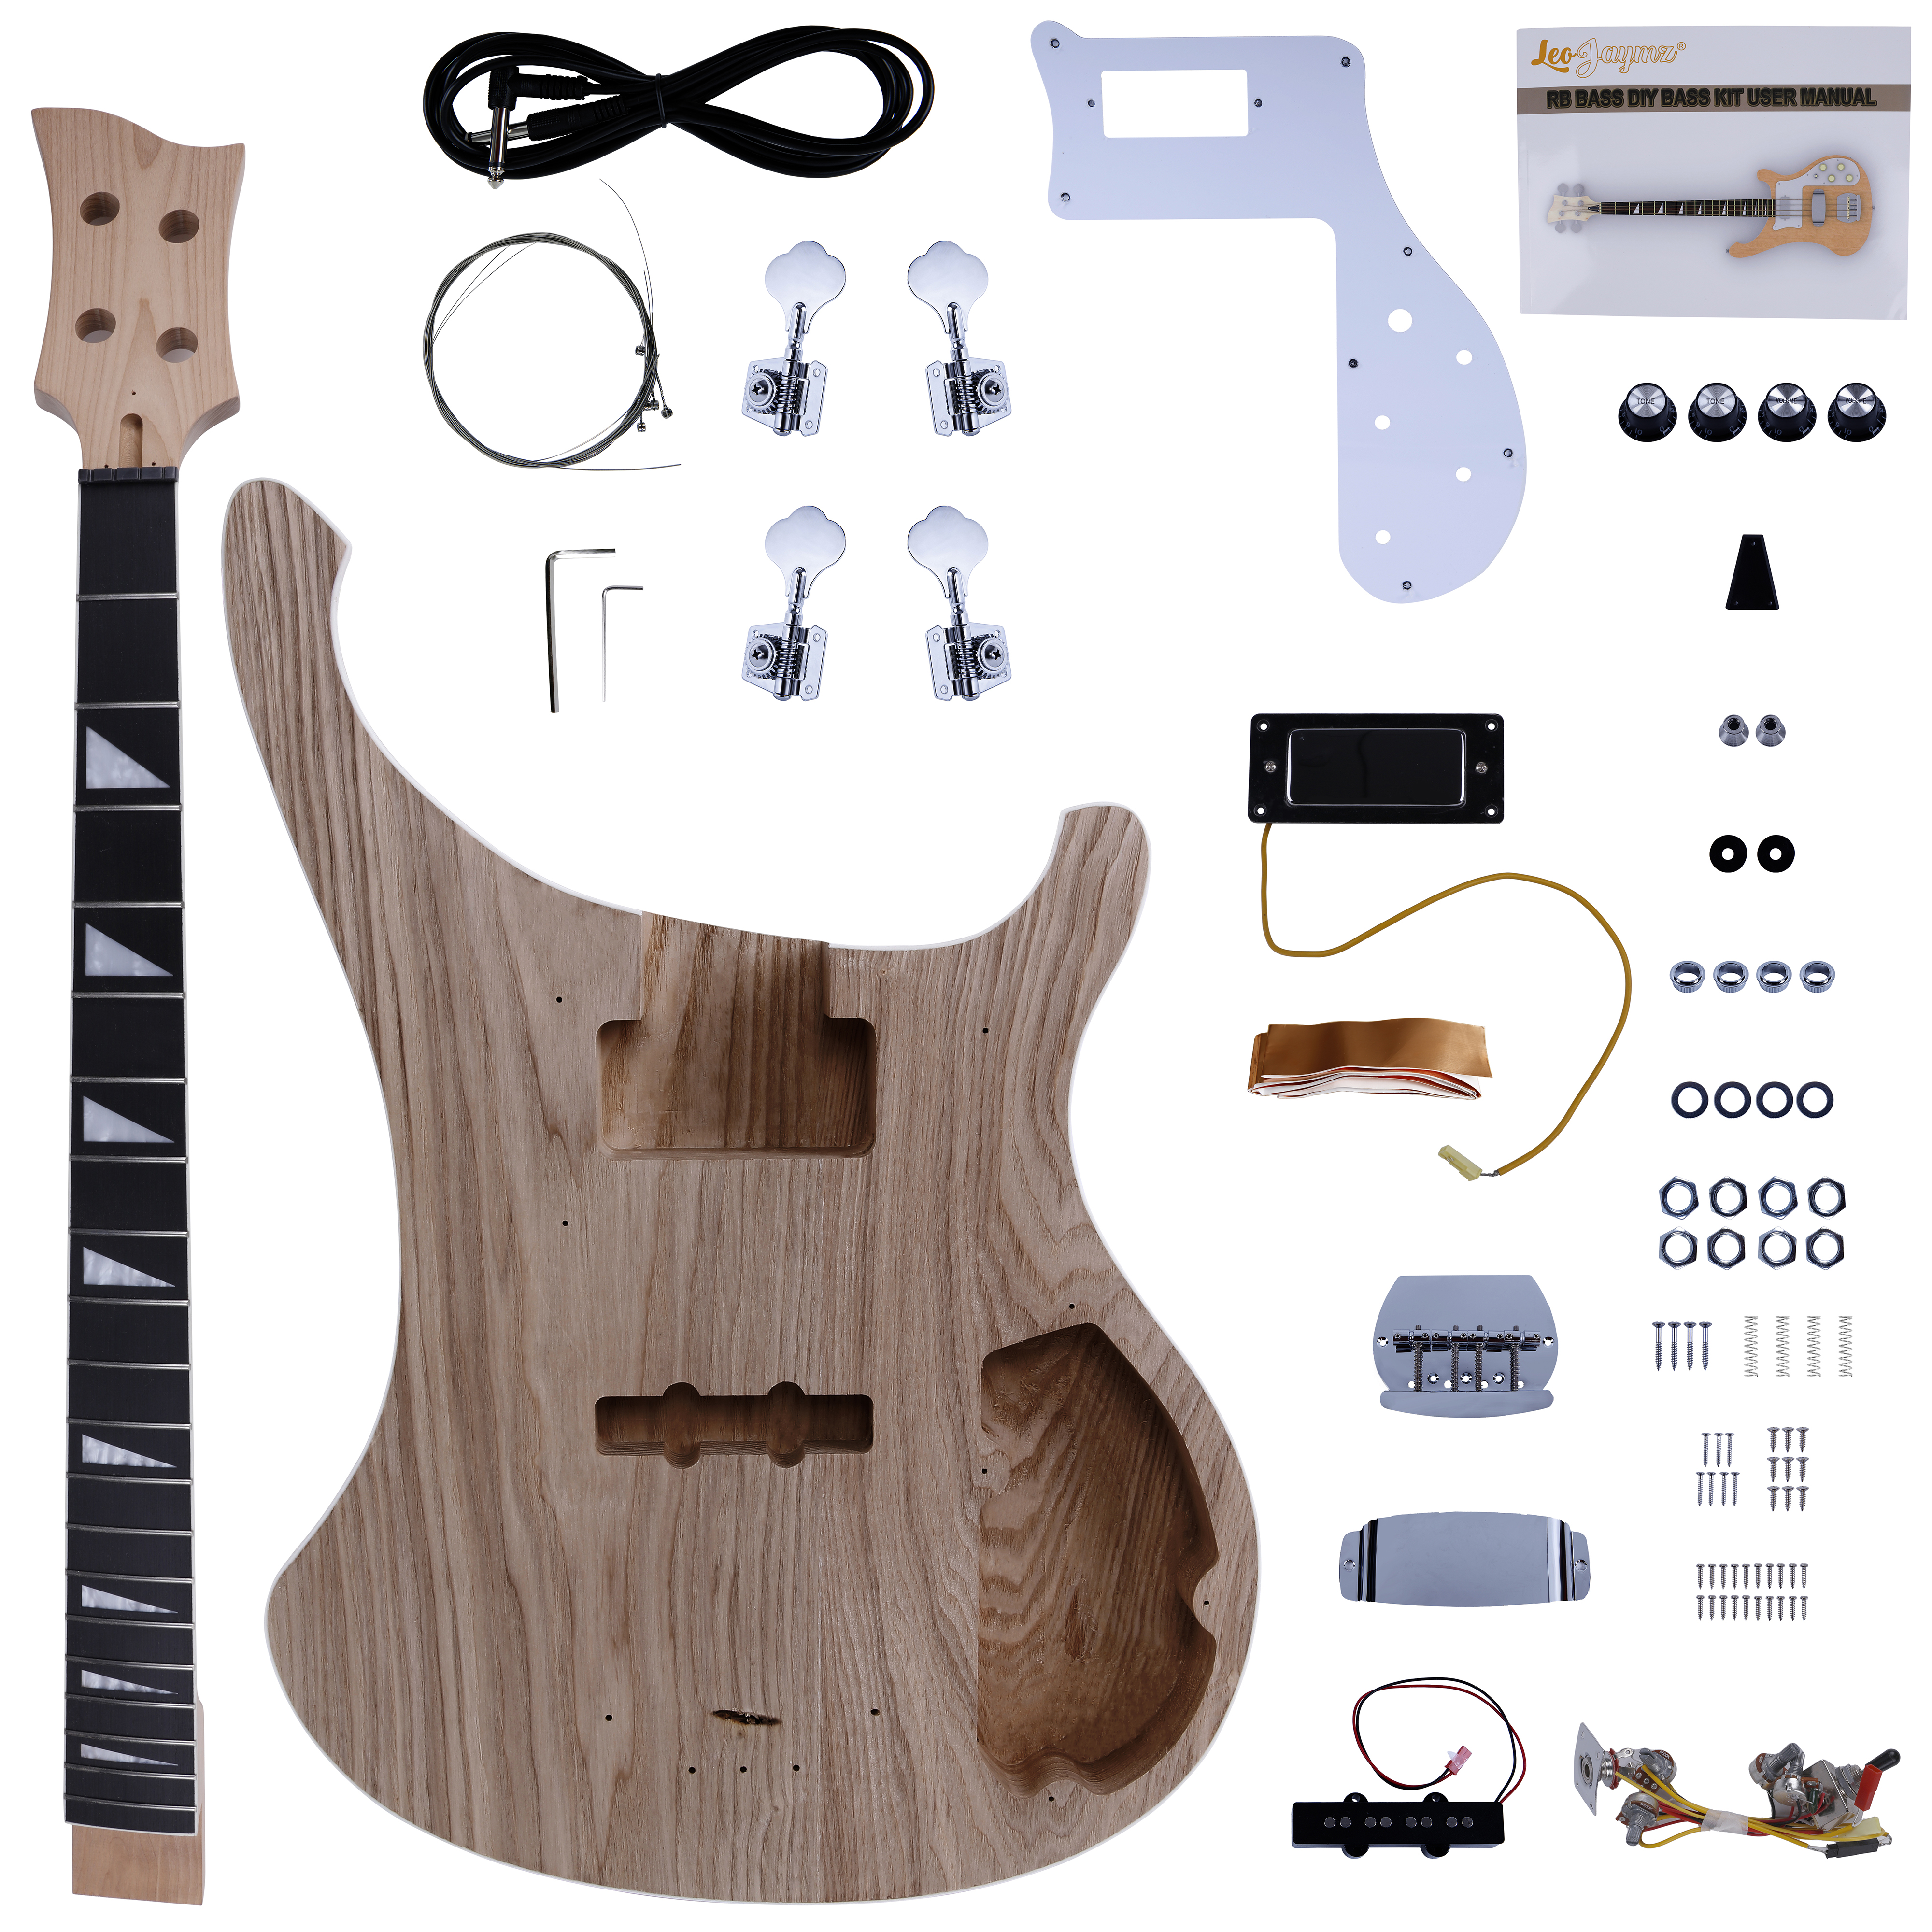 Leo Jaymz DIY Electric Bass Guitar Kits - Ash Body, Maple Neck and Ebony  Fingerboard - Fully Components Included (RB)